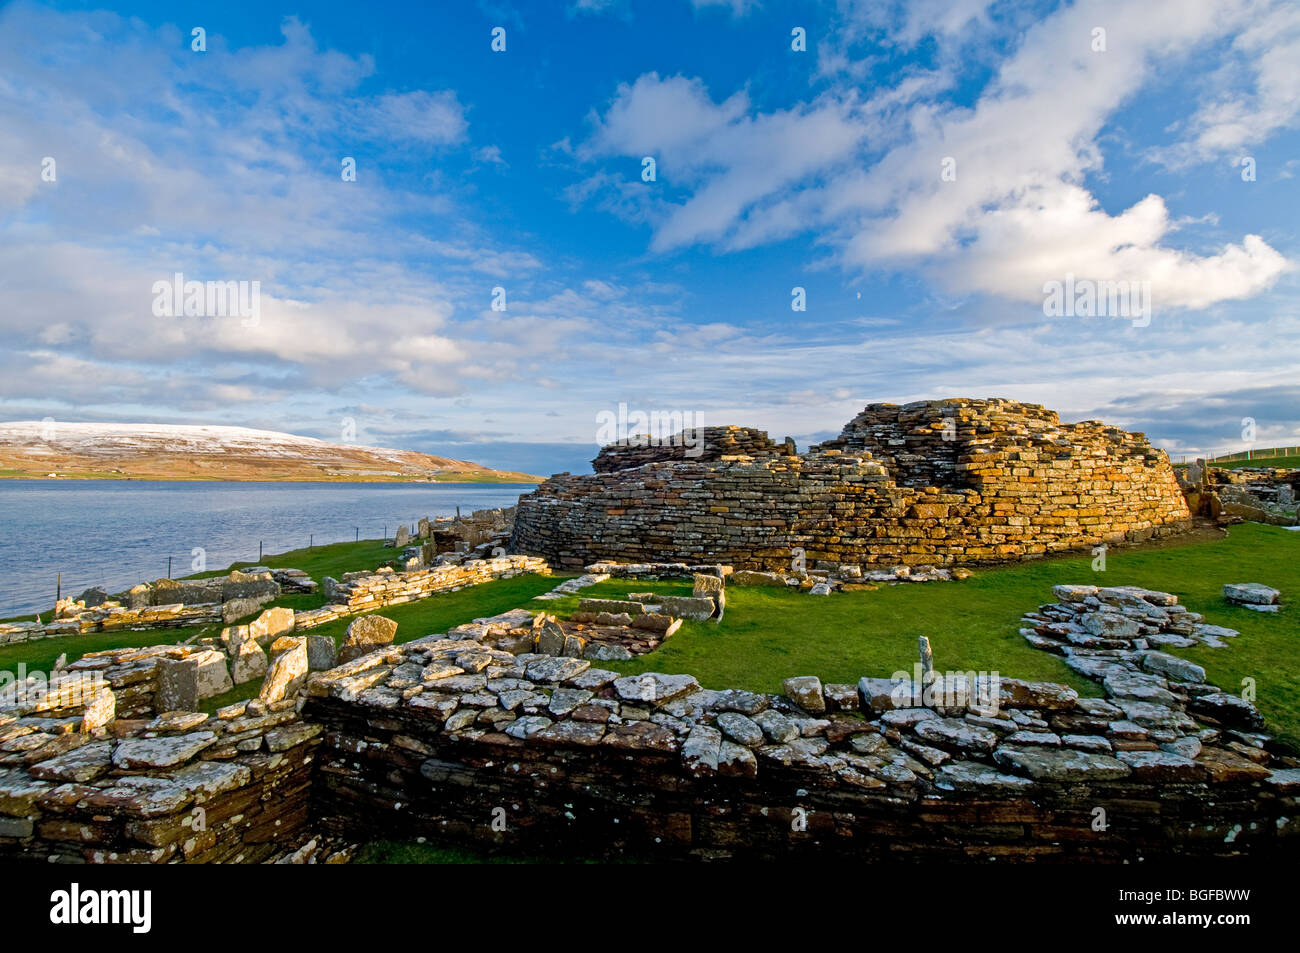 The Pictish / Norse site of the Broch o' Gurness on the Knowe o' Aikerness Mainland Orkney Isles Scotland.  SCO 5801 Stock Photo